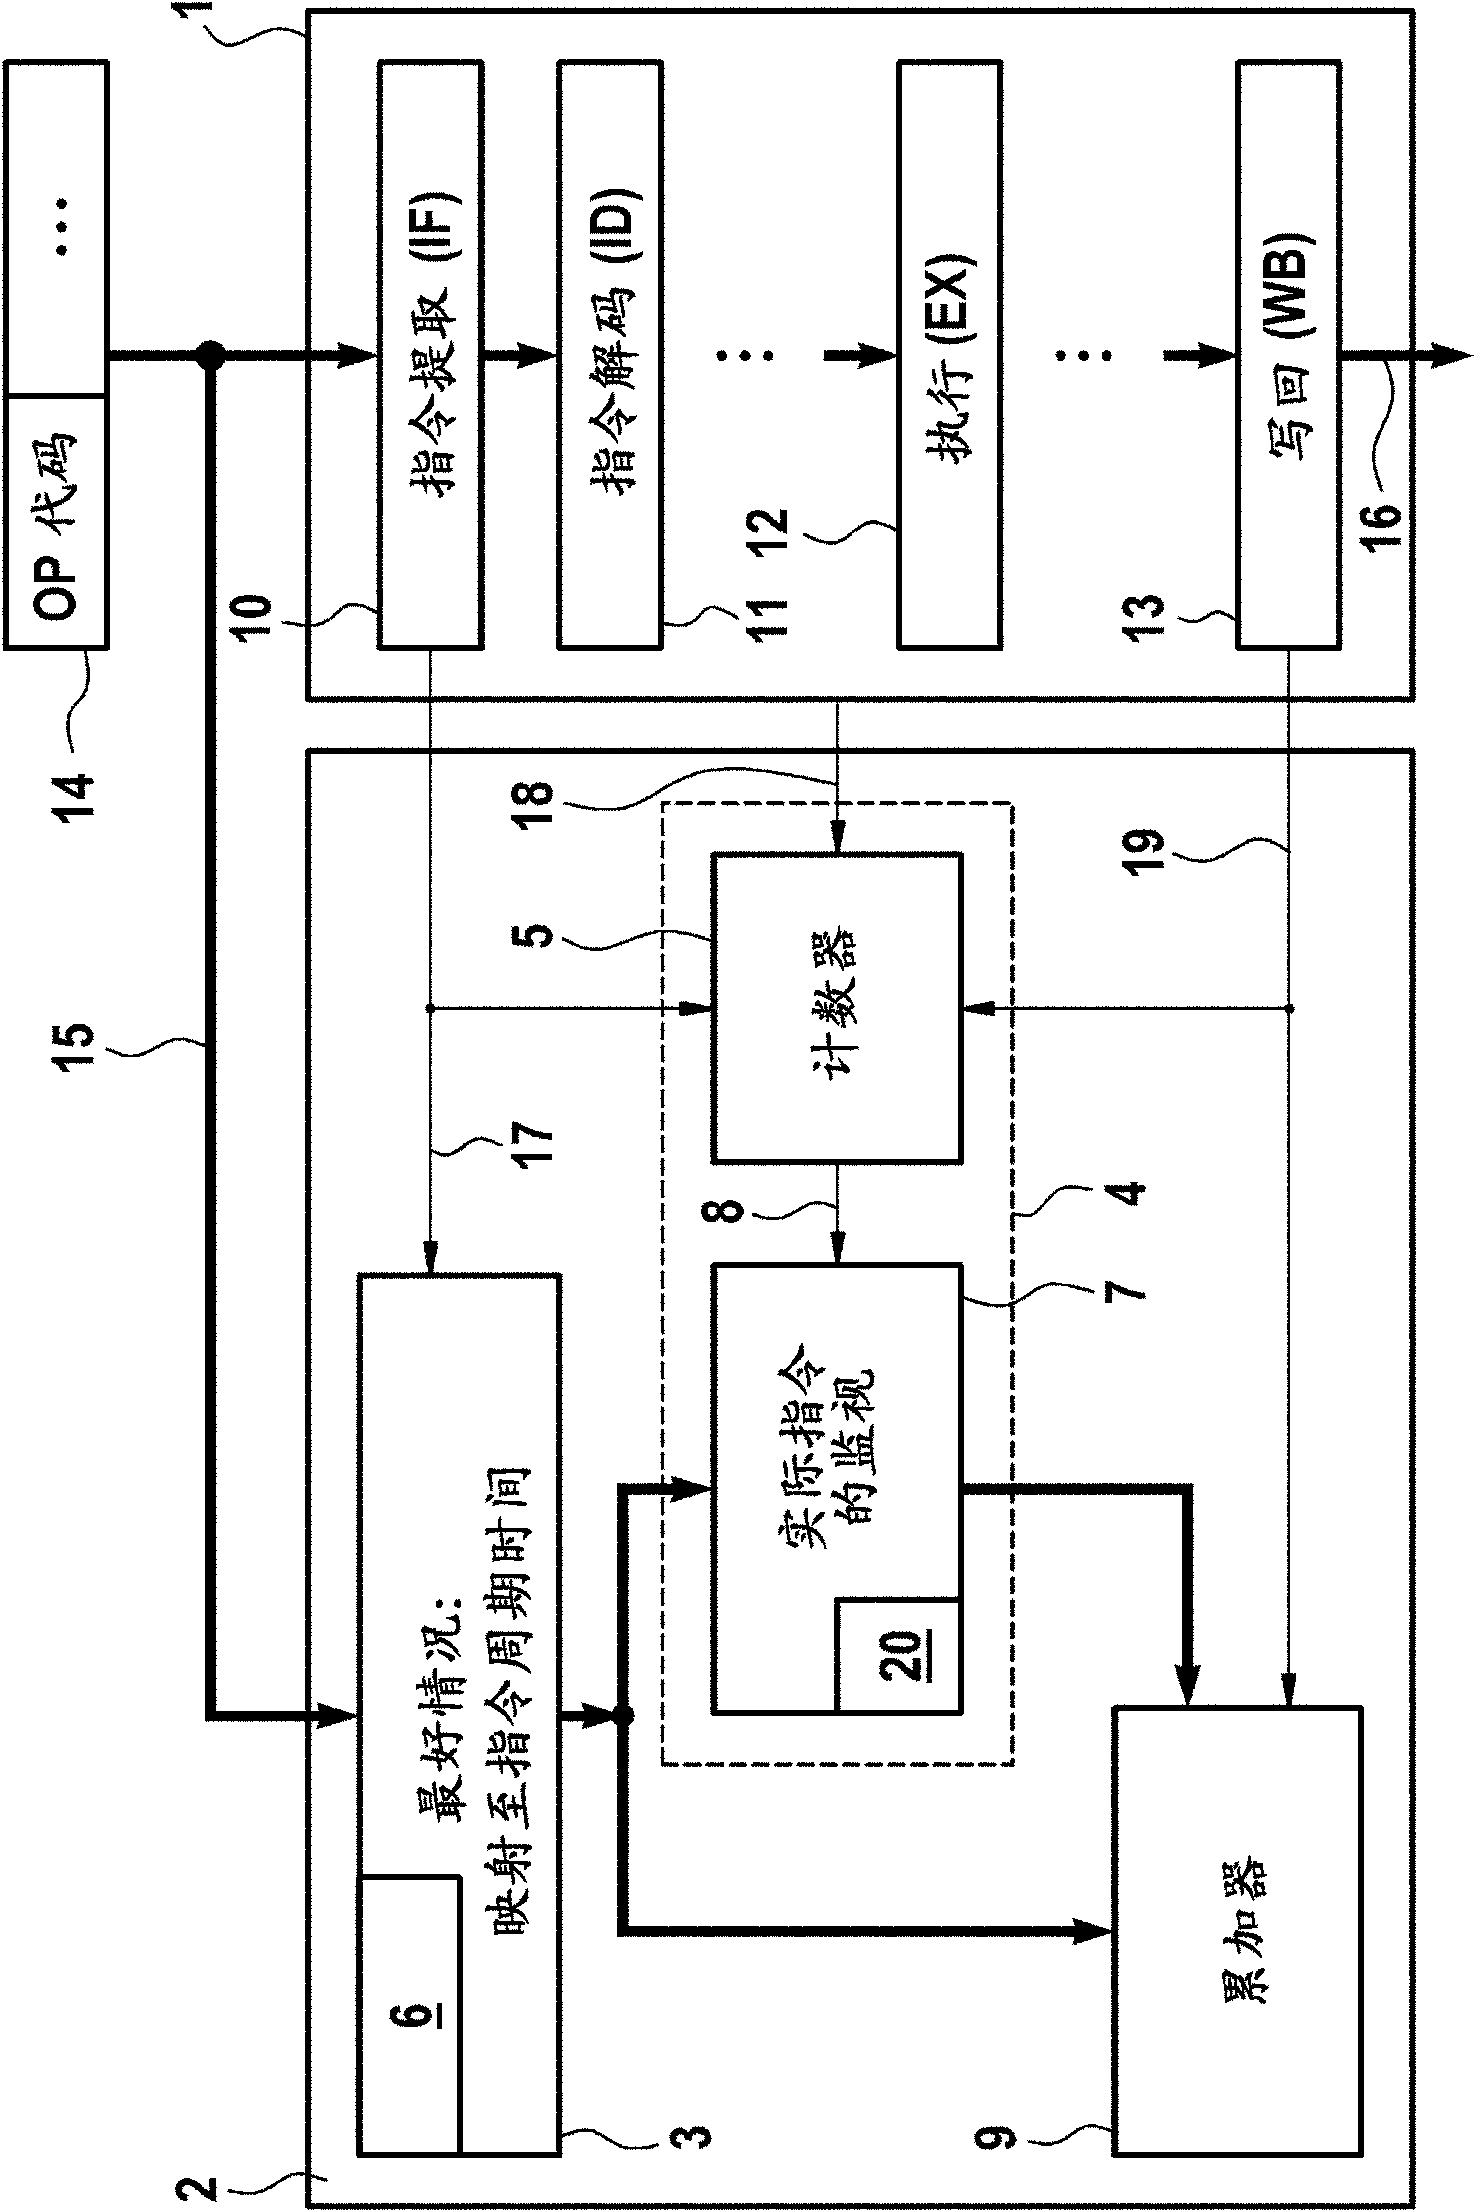 Microprocessor with pipeline bubble detection device